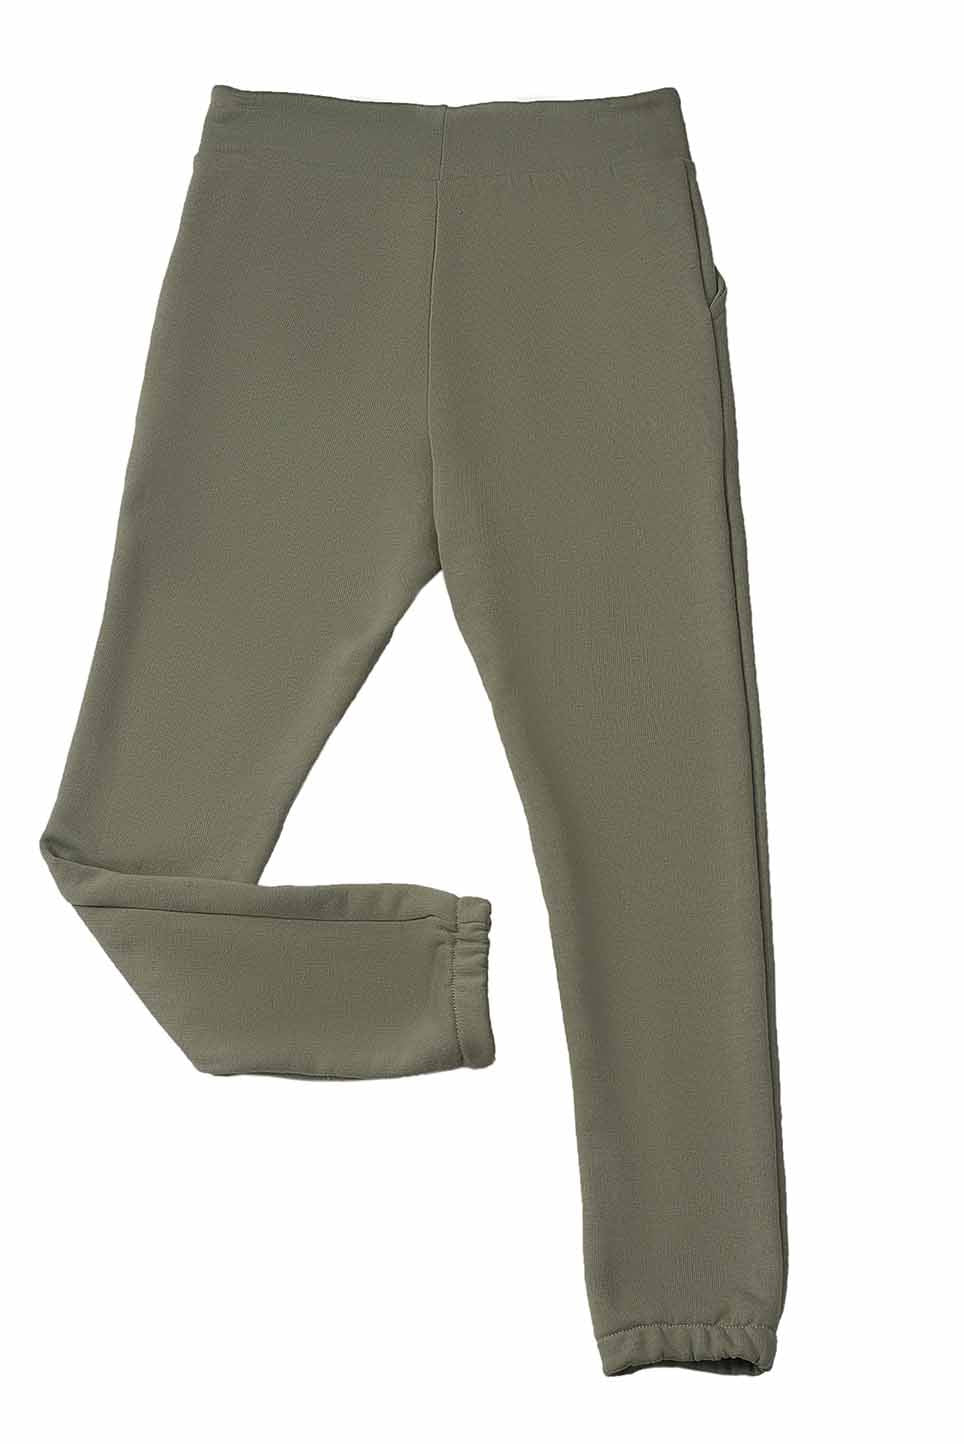 KDS-GC-12633 PULL ON TROUSER L/GREEN